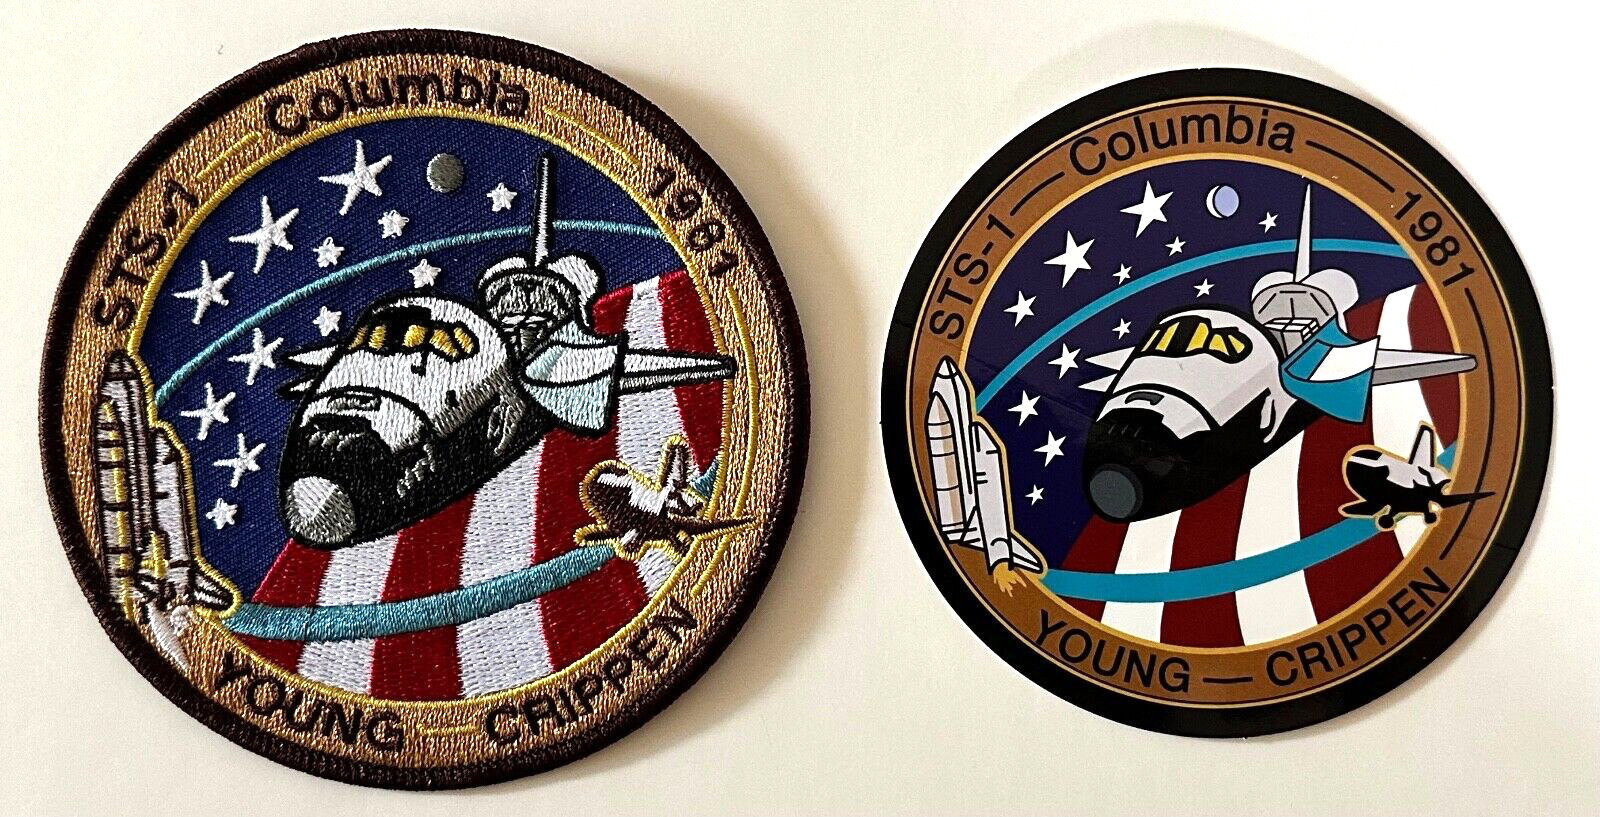 NASA...Columbia Space Shuttle..STS 1 ...First Mission... Patch + Decal